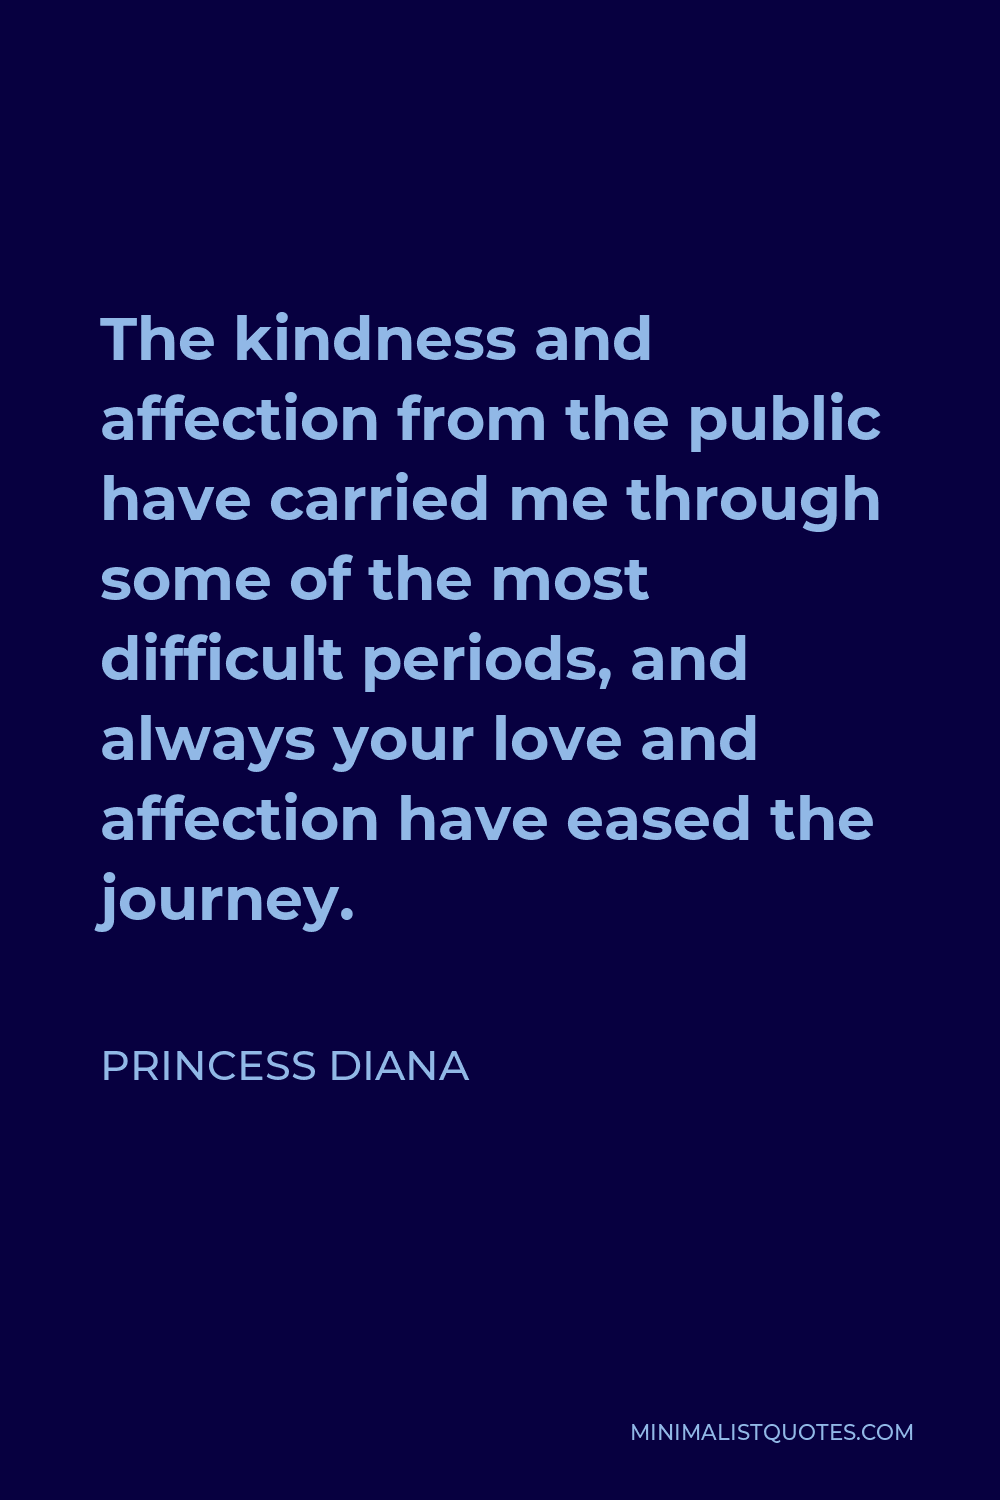 Princess Diana Quote - The kindness and affection from the public have carried me through some of the most difficult periods, and always your love and affection have eased the journey.